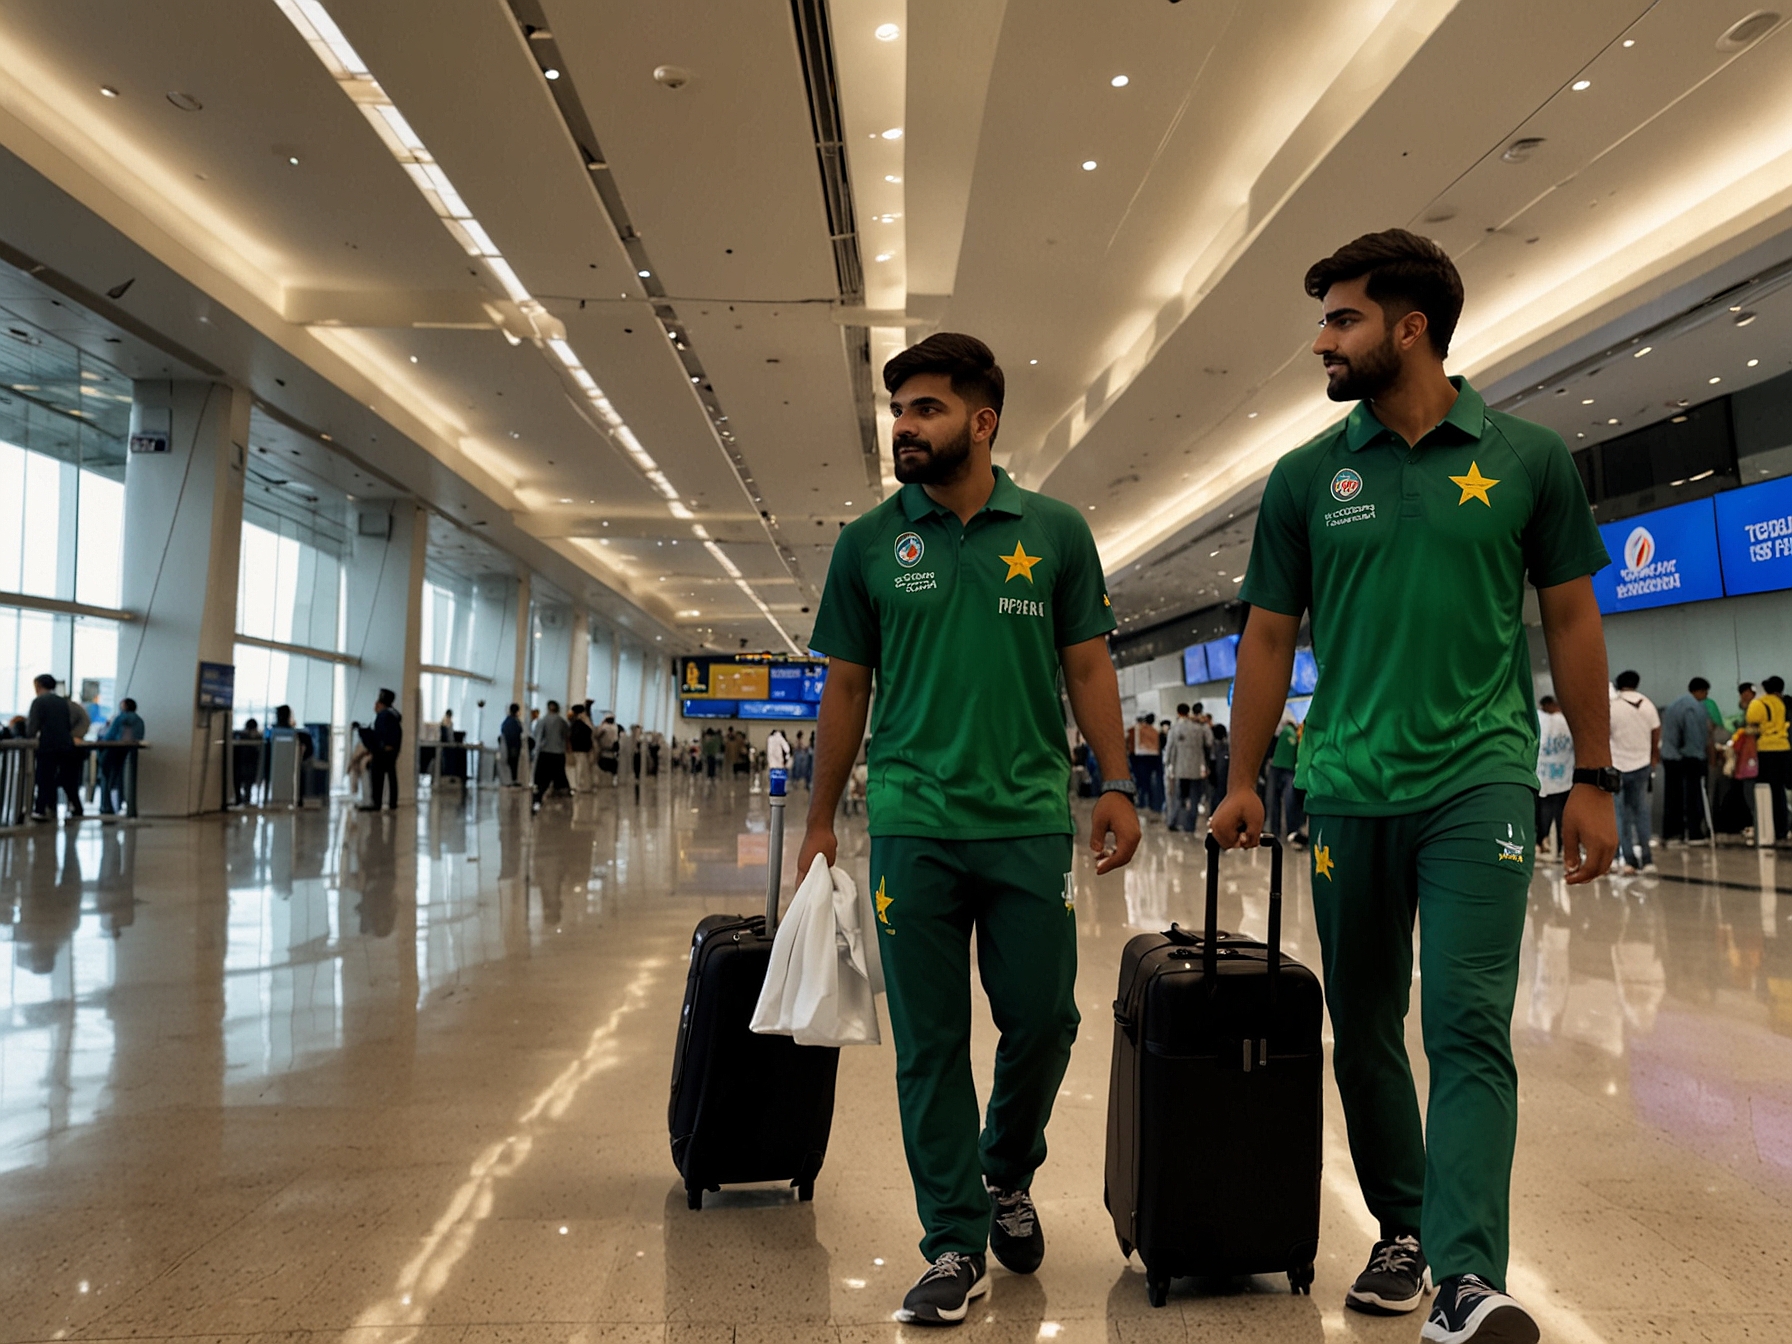 Pakistani cricket players, including Captain Babar Azam and Shadab Khan, are pictured at an airport, ready to depart for Dubai for a brief period of rest and recuperation after the T20 World Cup.